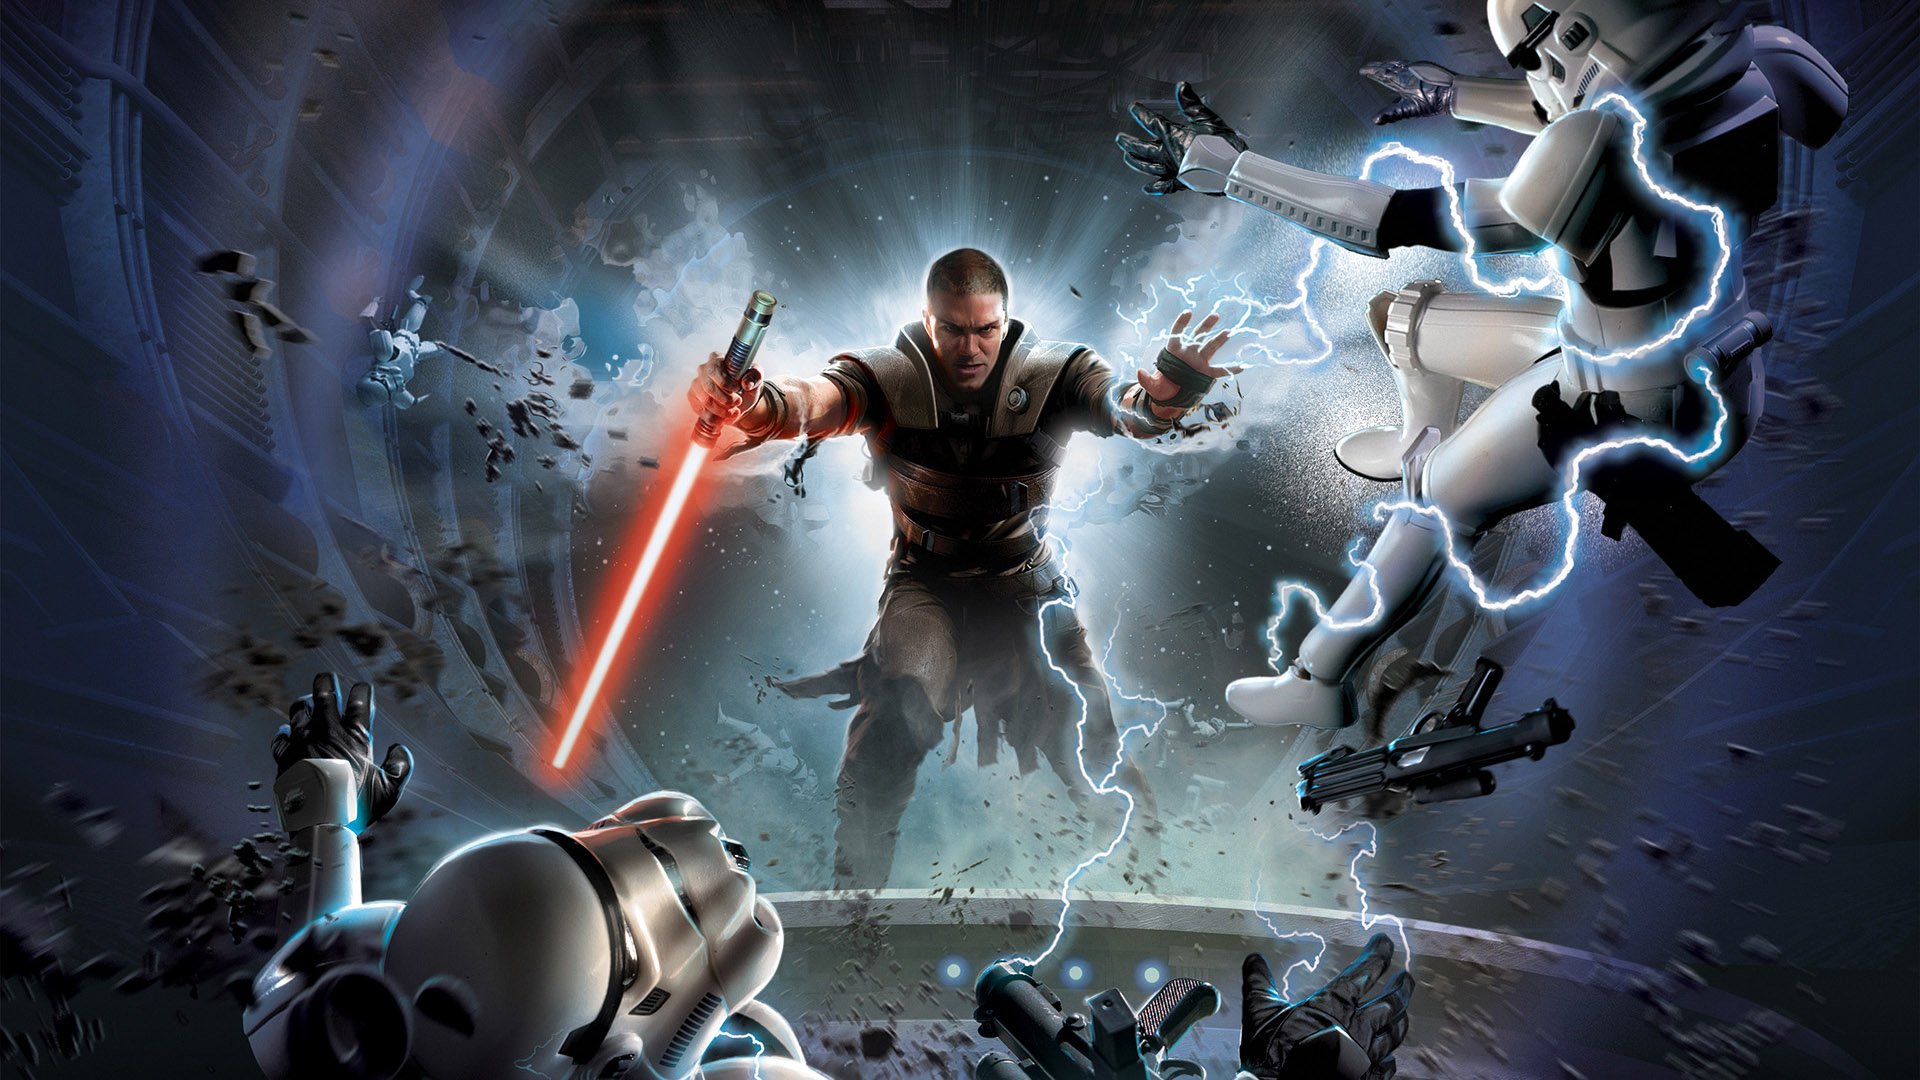 Star Wars - The Force Unleashed ROM - PS2 Download - Emulator Games